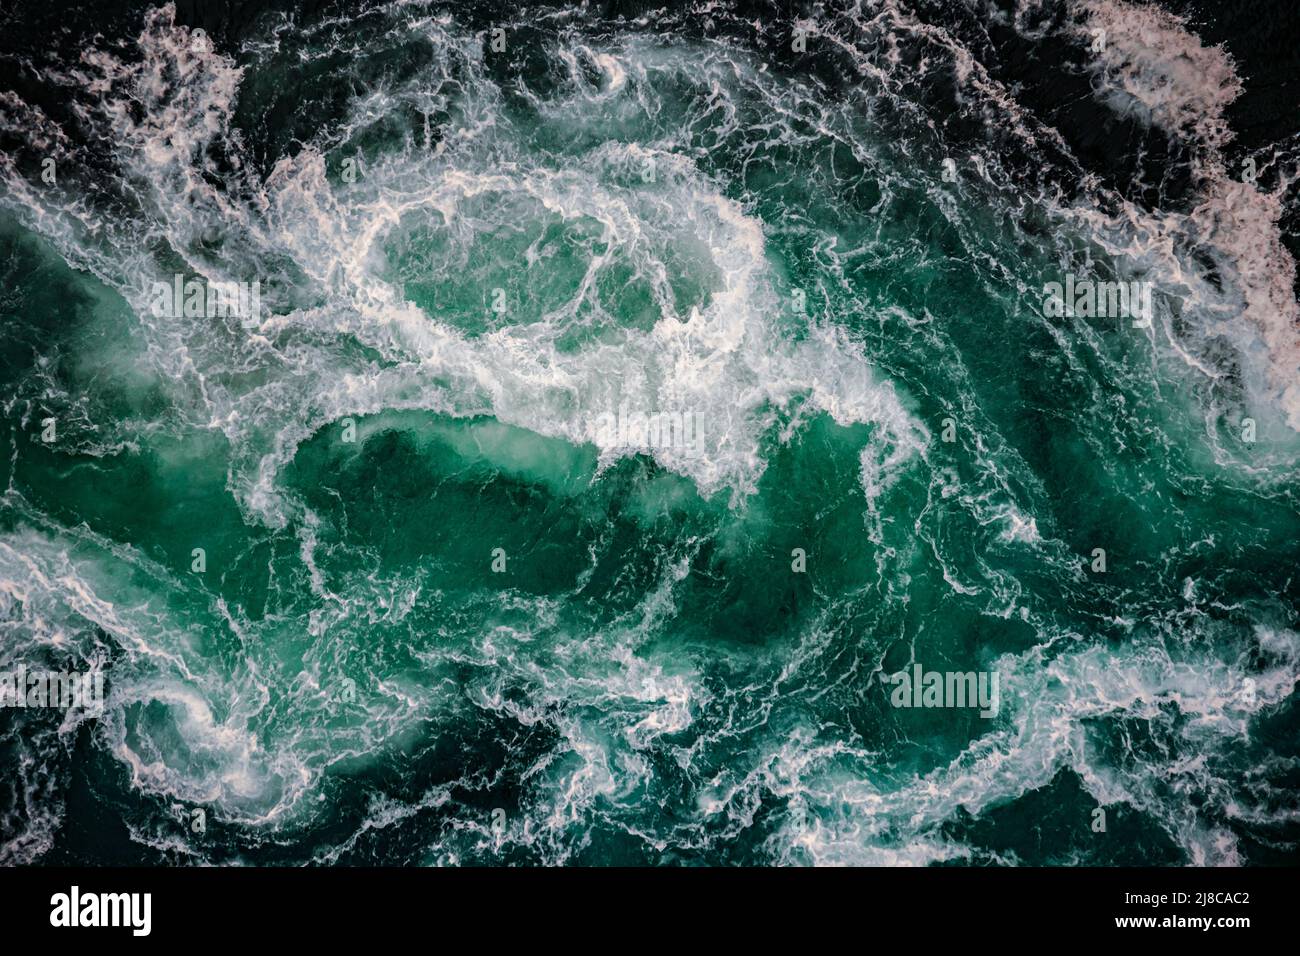 Waves of water of the river and the sea meet each other during high tide and low tide. Whirlpools of the maelstrom of Saltstraumen, Nordland, Norway Stock Photo